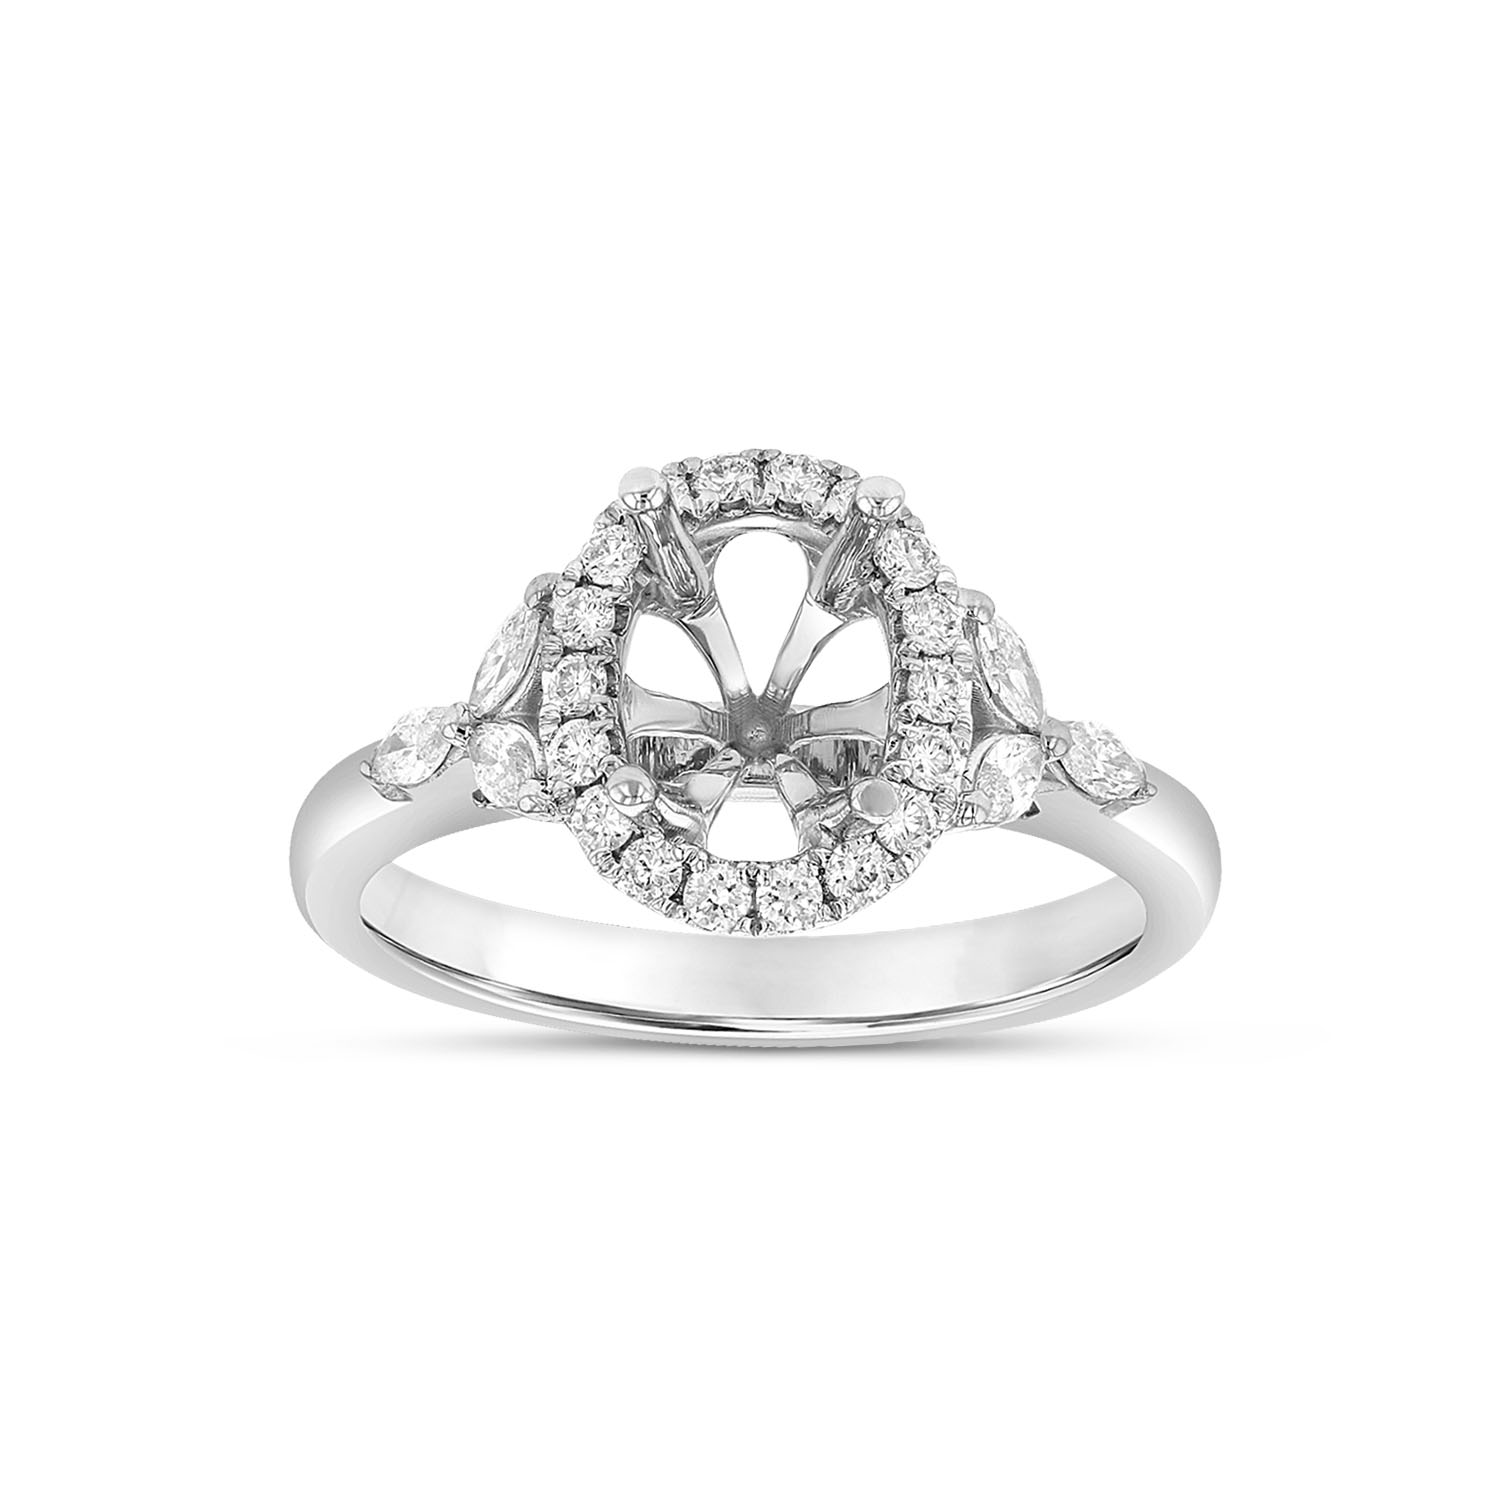 View 0.43ctw Diamond Oval Shaped Semi Mount in 18k White Gold